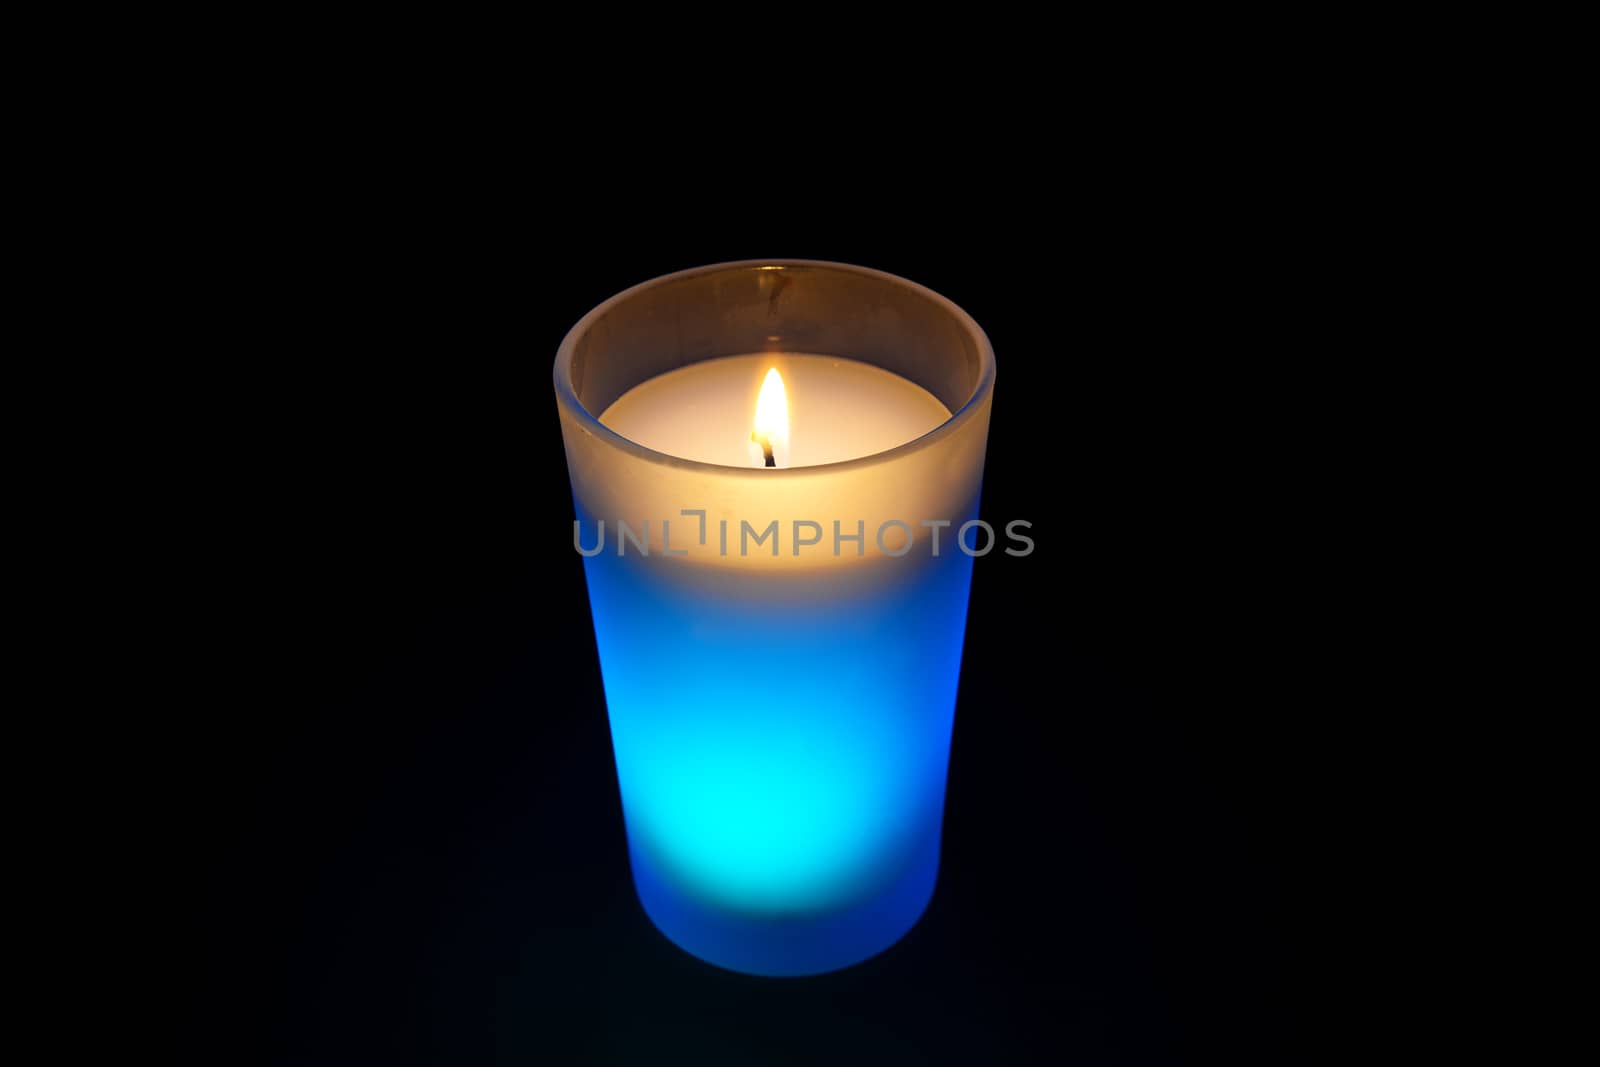 Photo of a burning light blue candle isolated on black background. Objects photography.